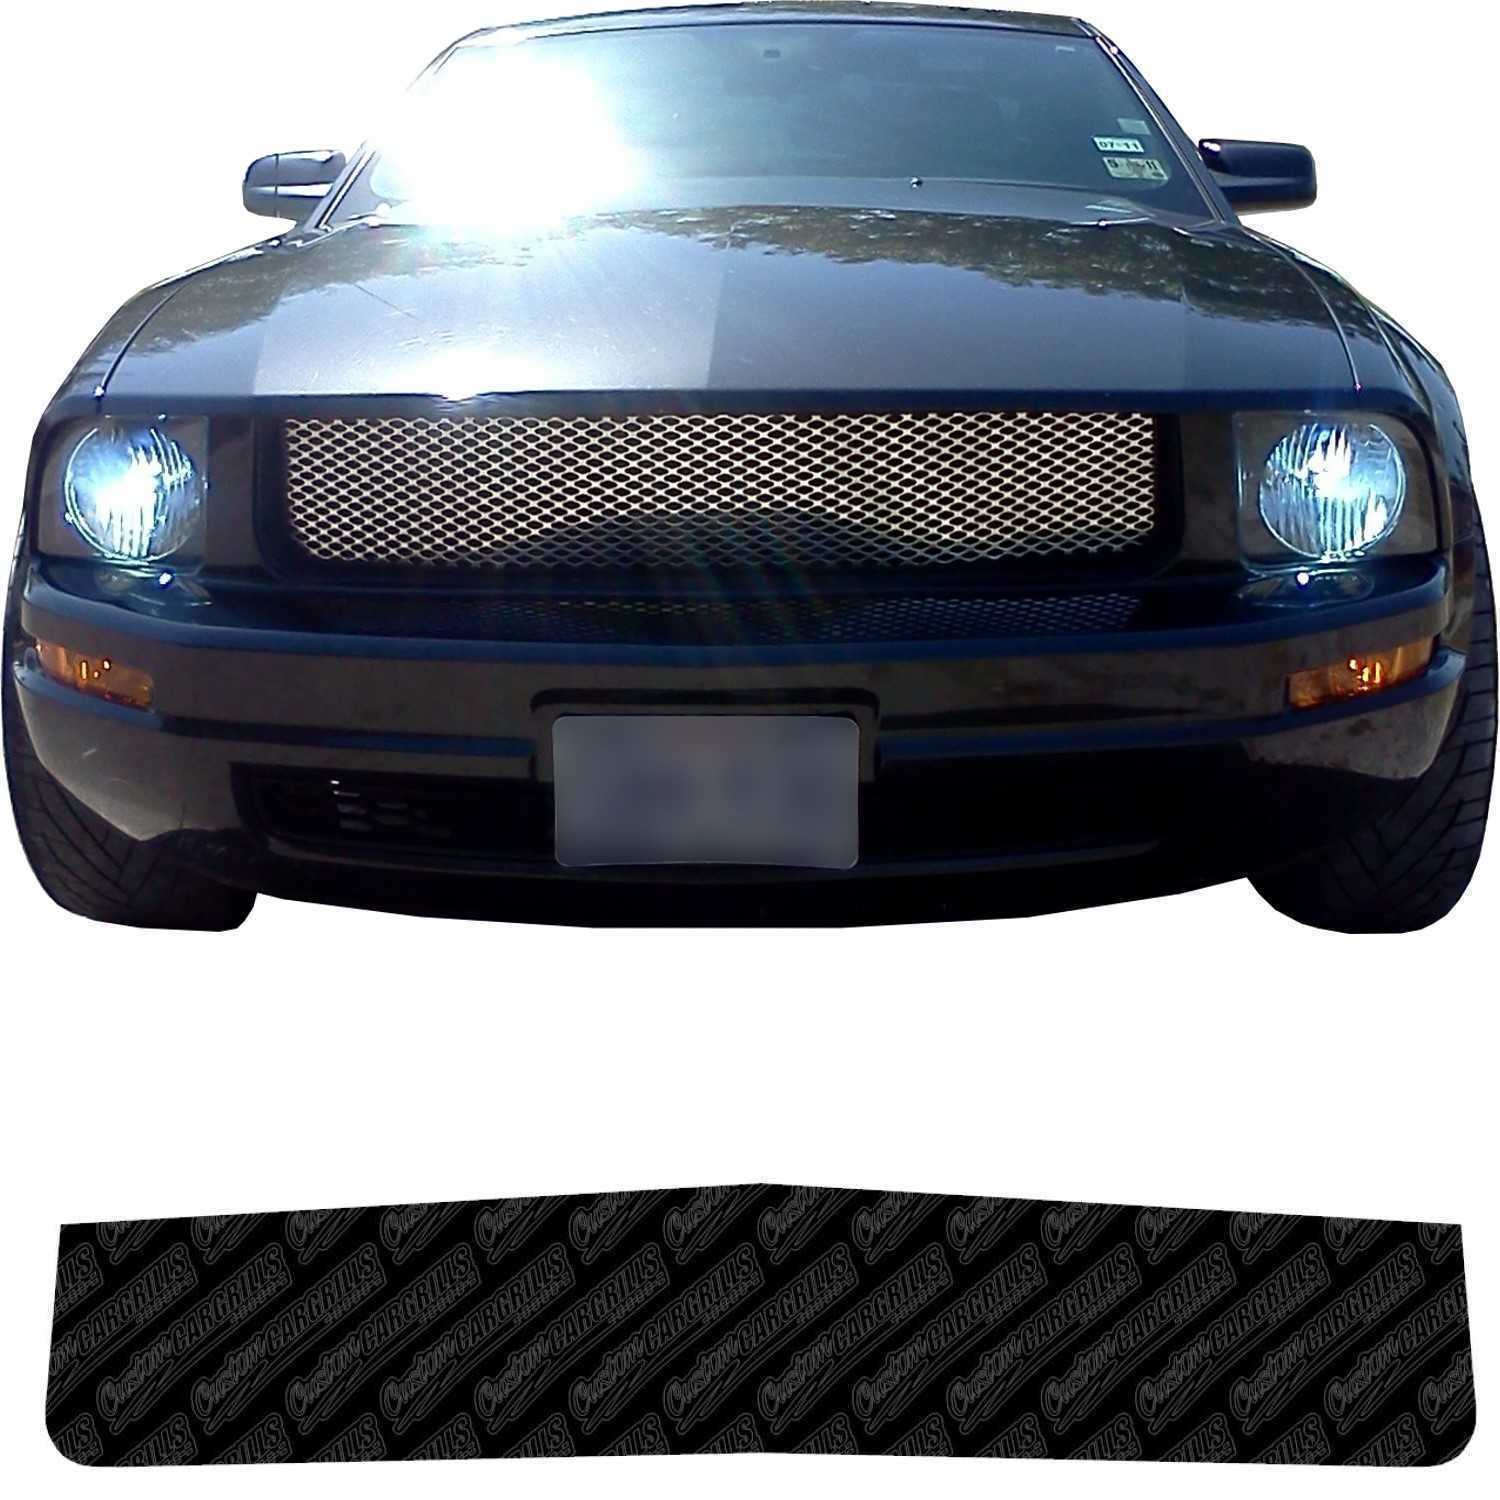 2005 - 2009 Ford Mustang V6 Mesh Grill Template